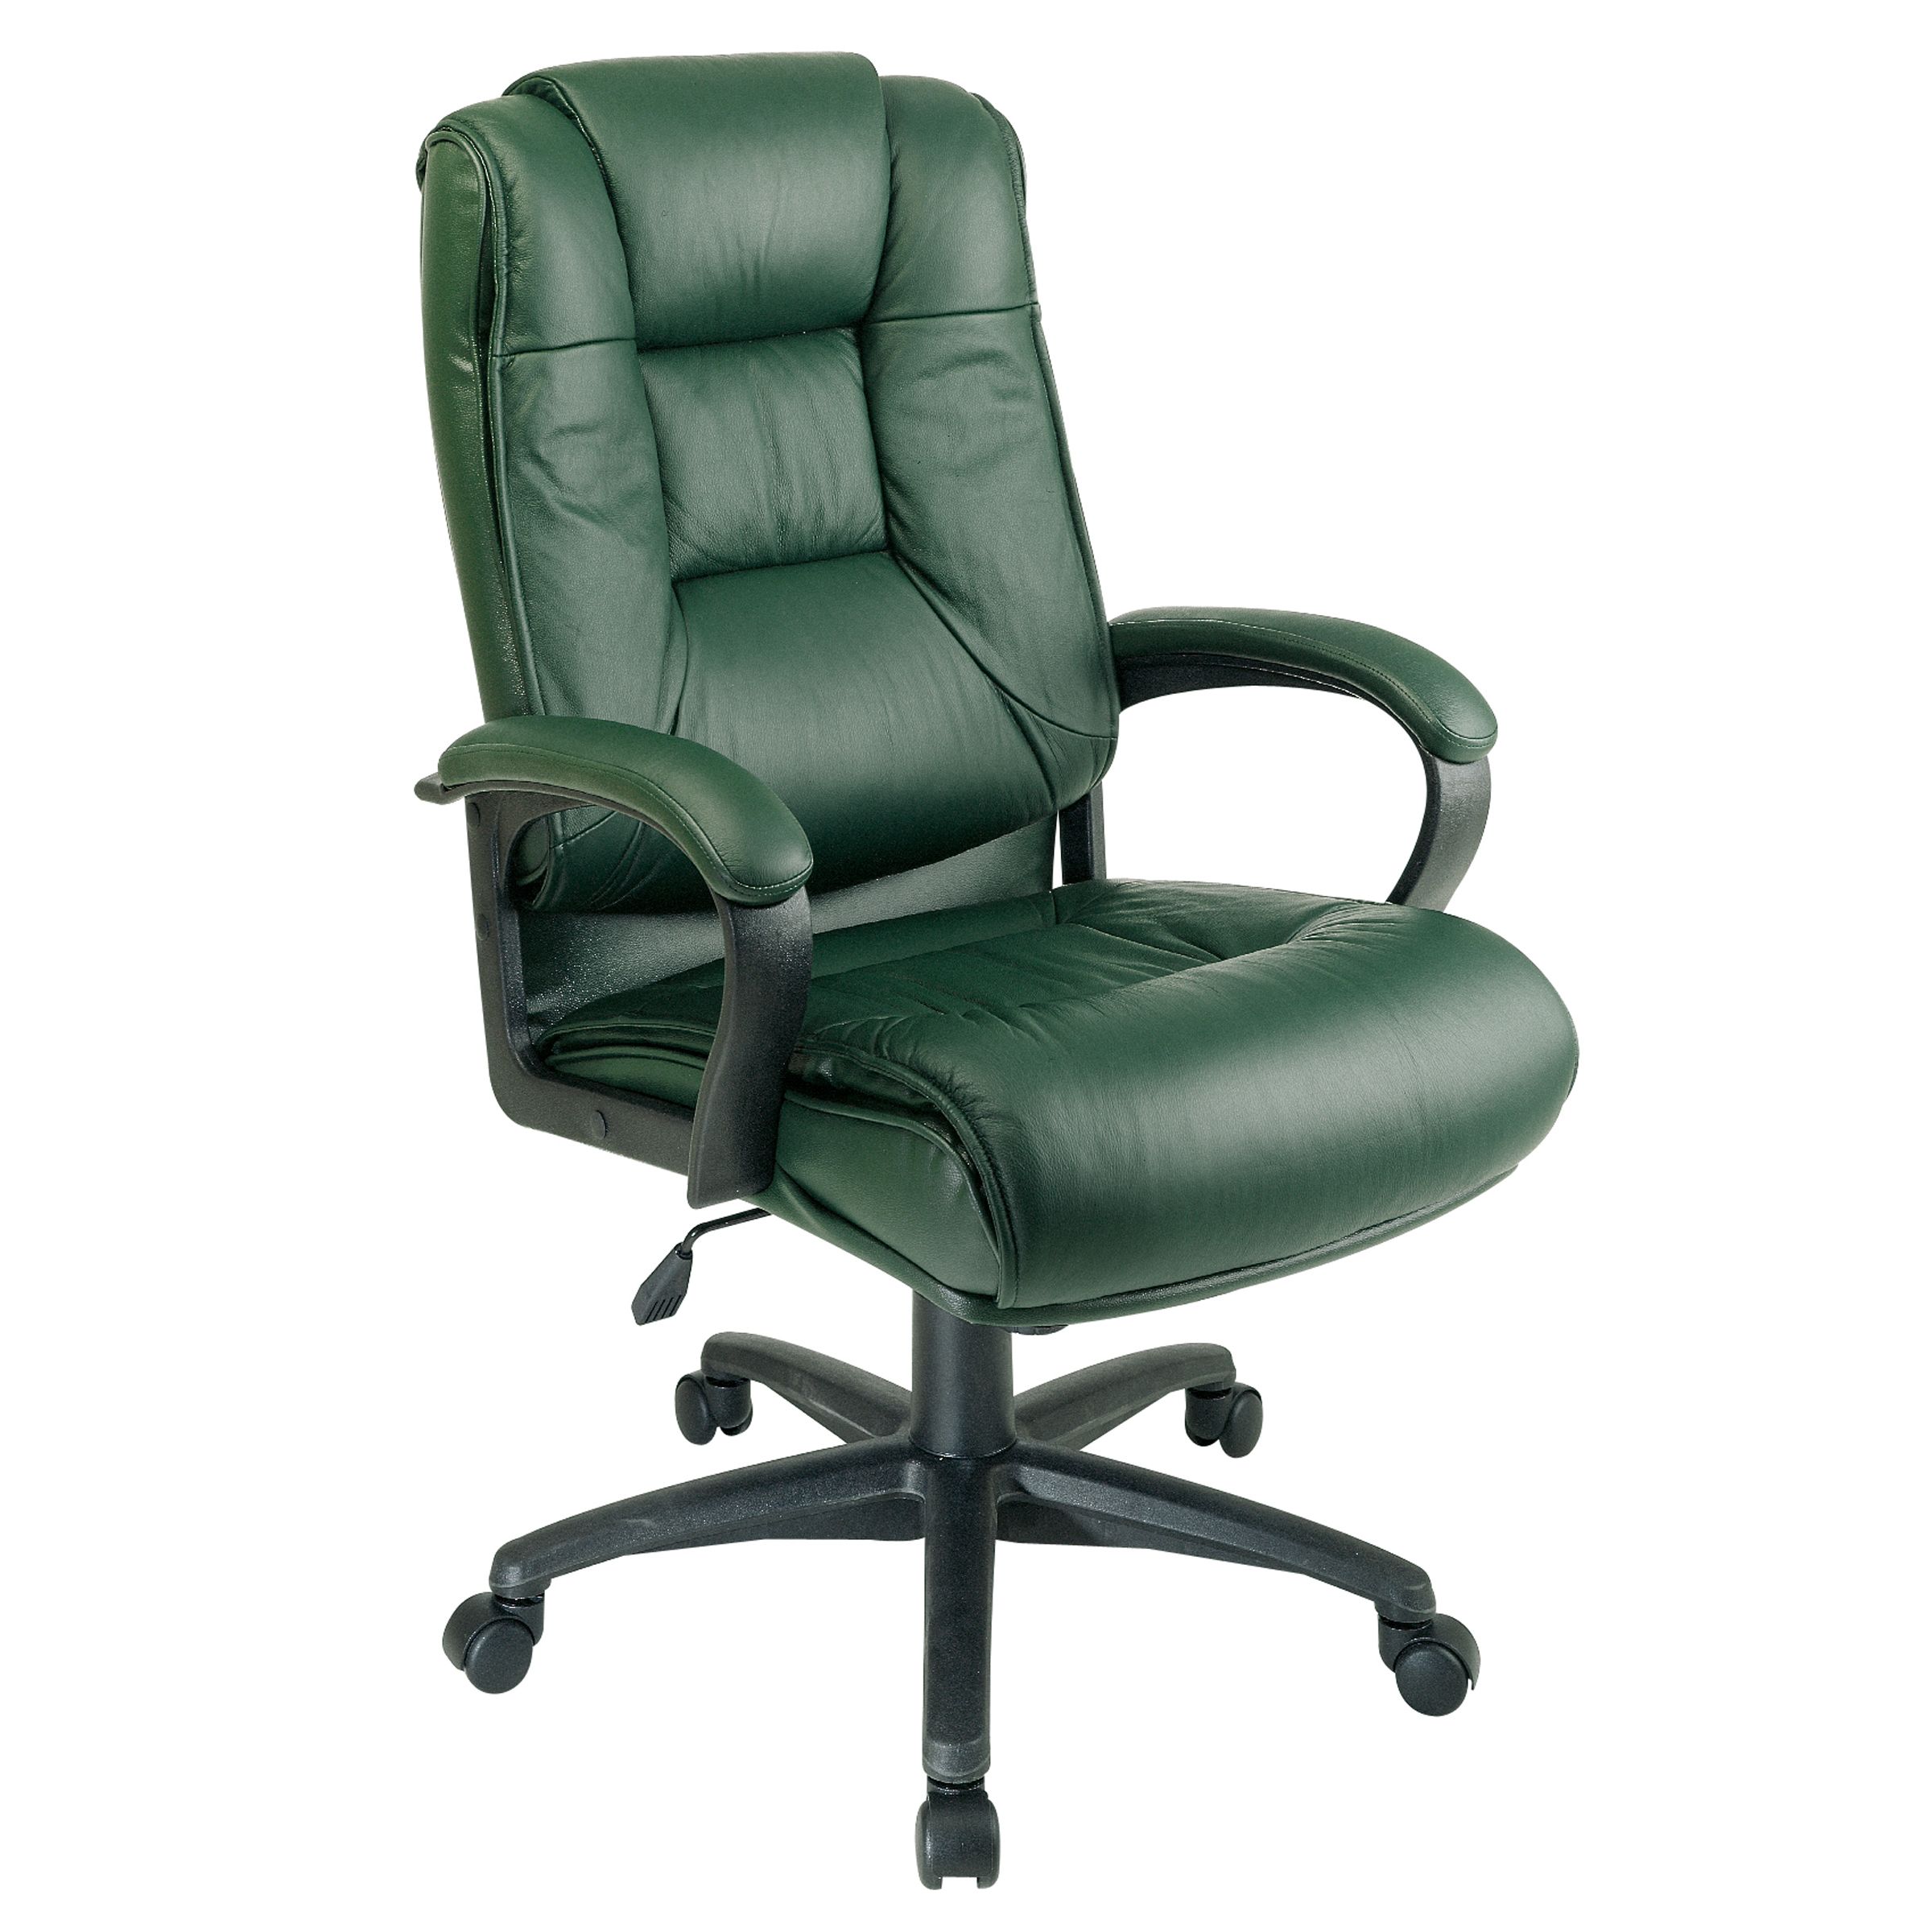 Office Star Deluxe High-Back Adjustable Executive Leather Chair - Green